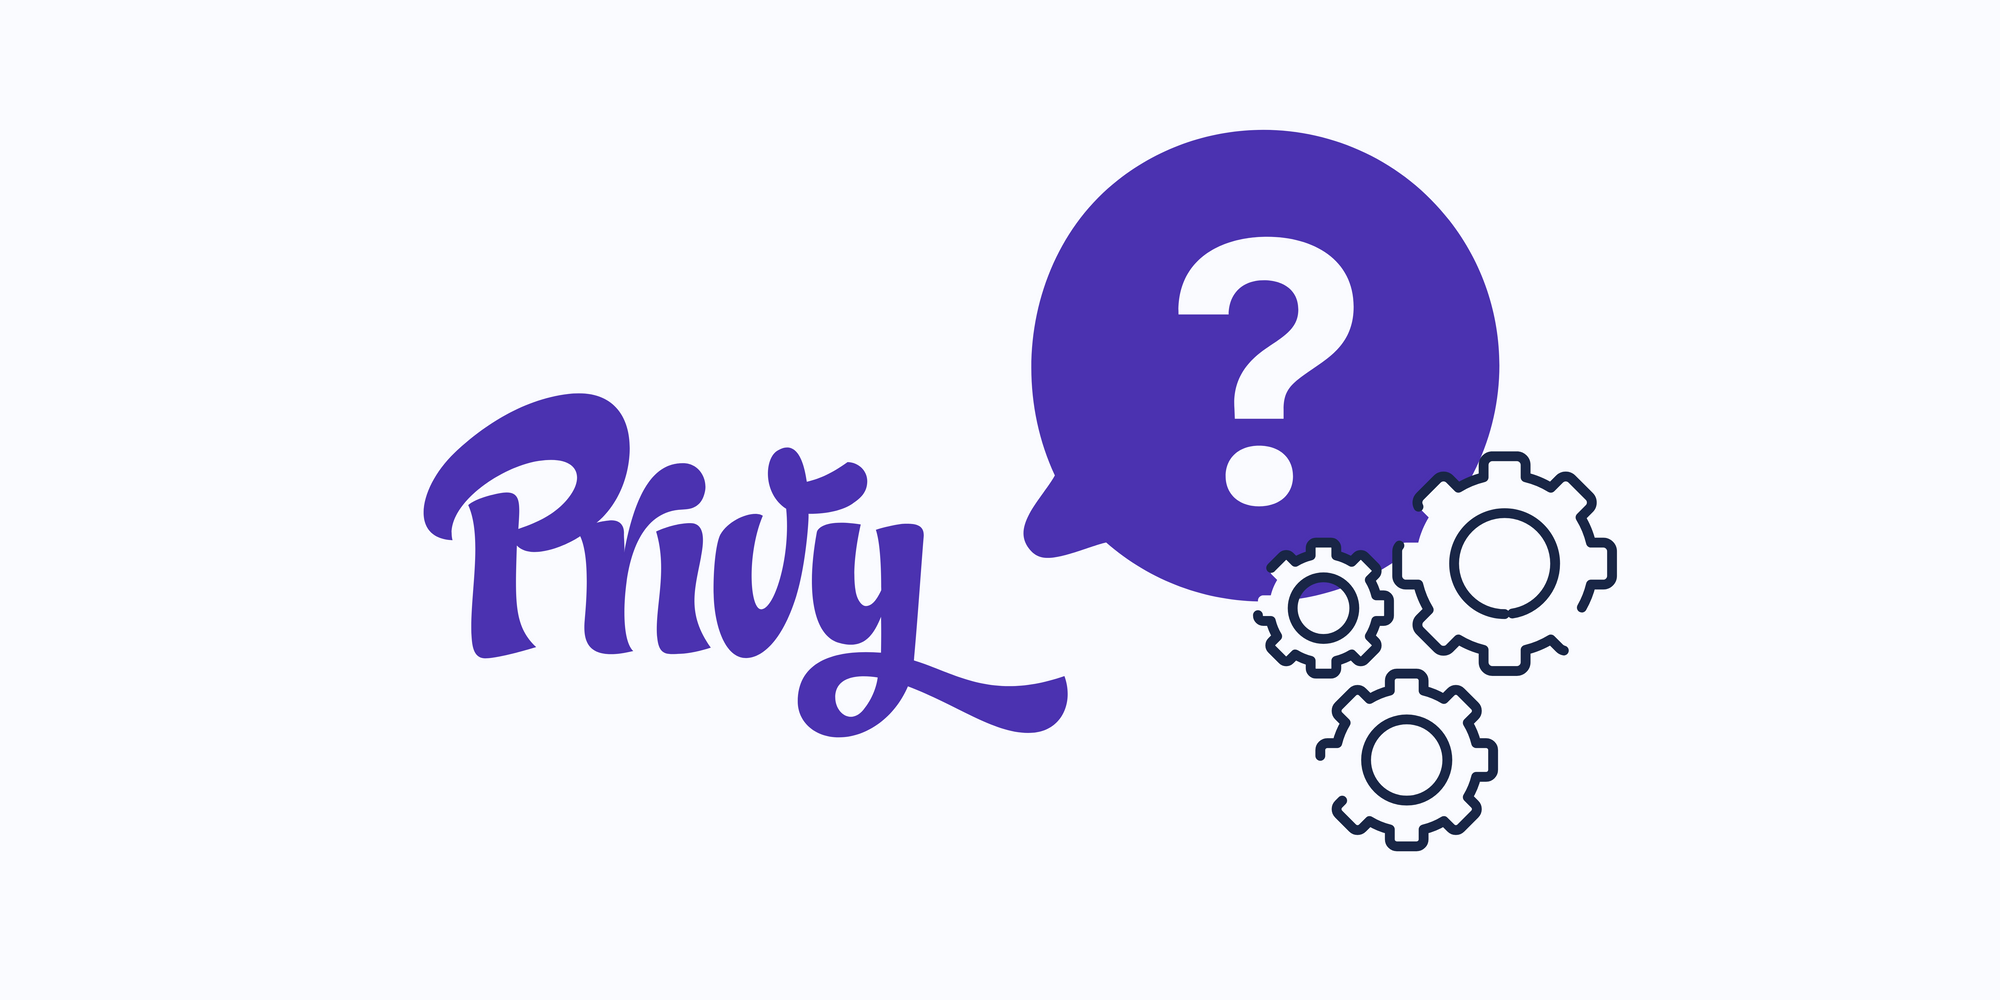 Privy icon, a question mark and settings icon on blue background